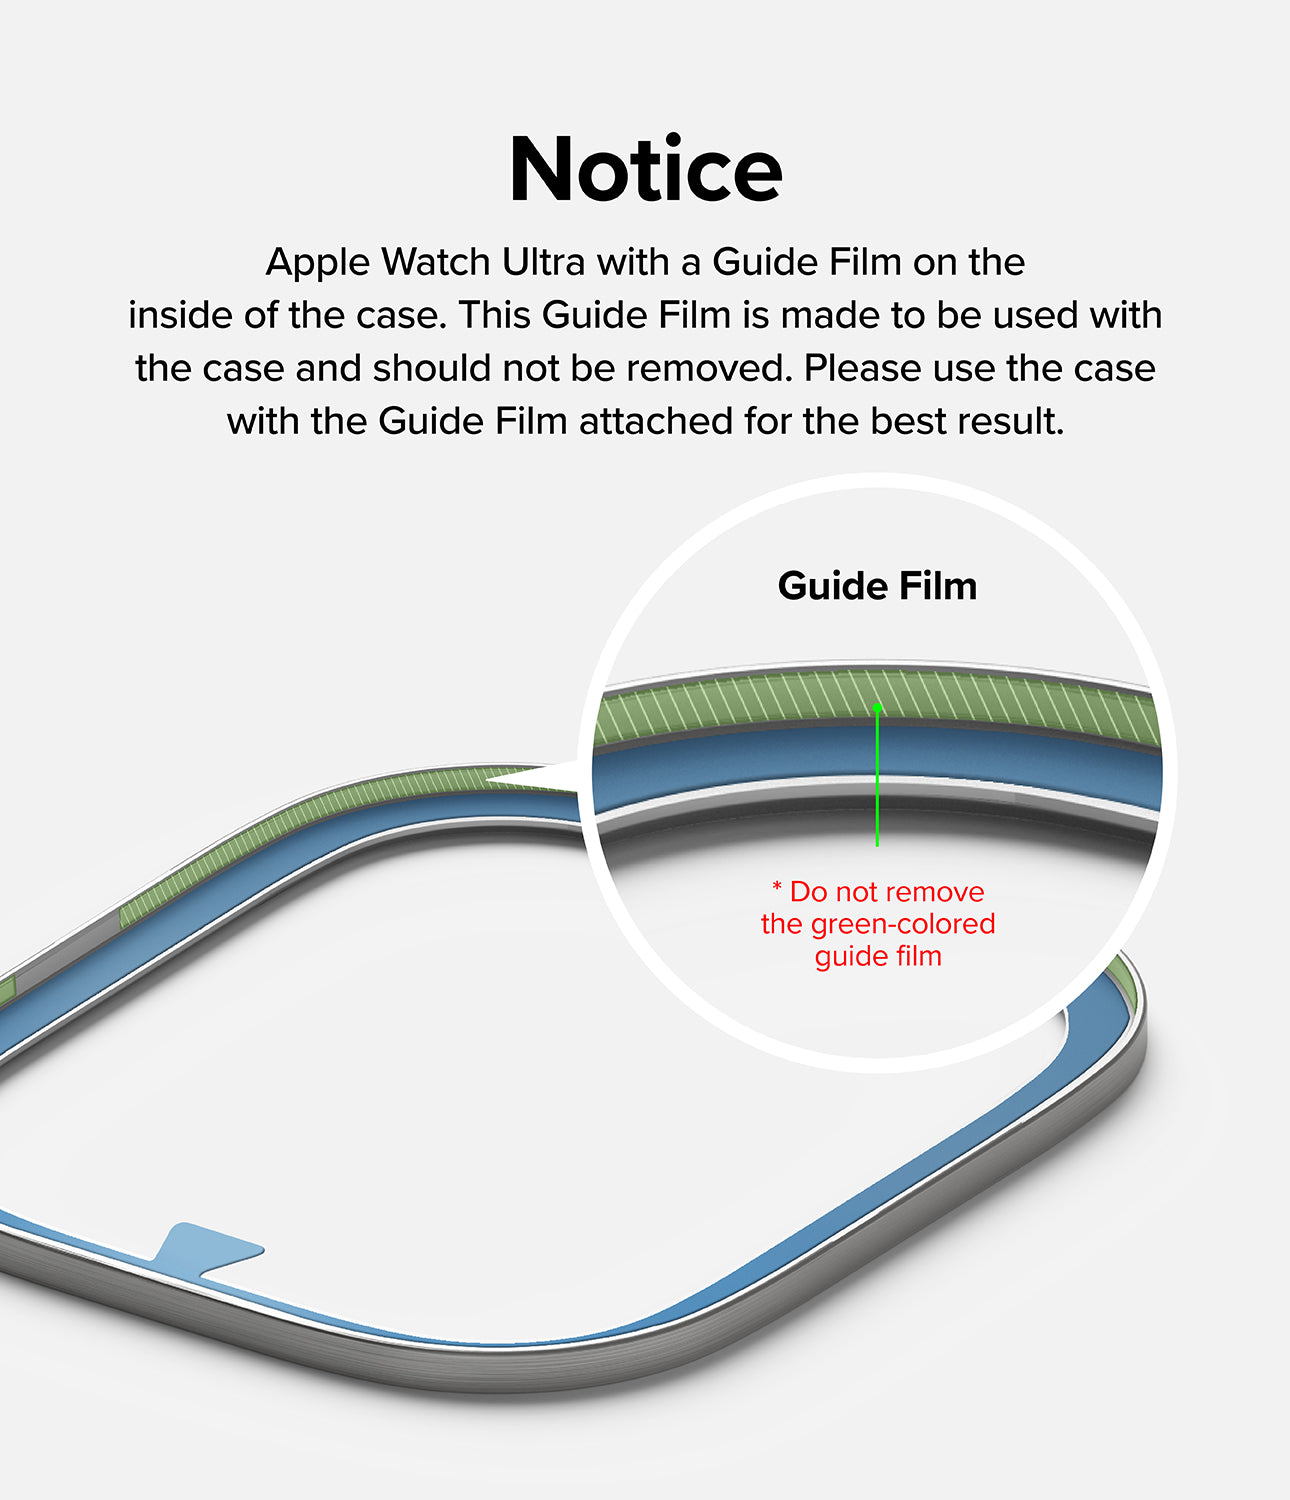 Notice - Apple Watch Ultra with a Guide Film on the inside of the case. This Guide Film is made to be used with the case and should not be removed. Please use the case with the Guide Film attached for the best result.